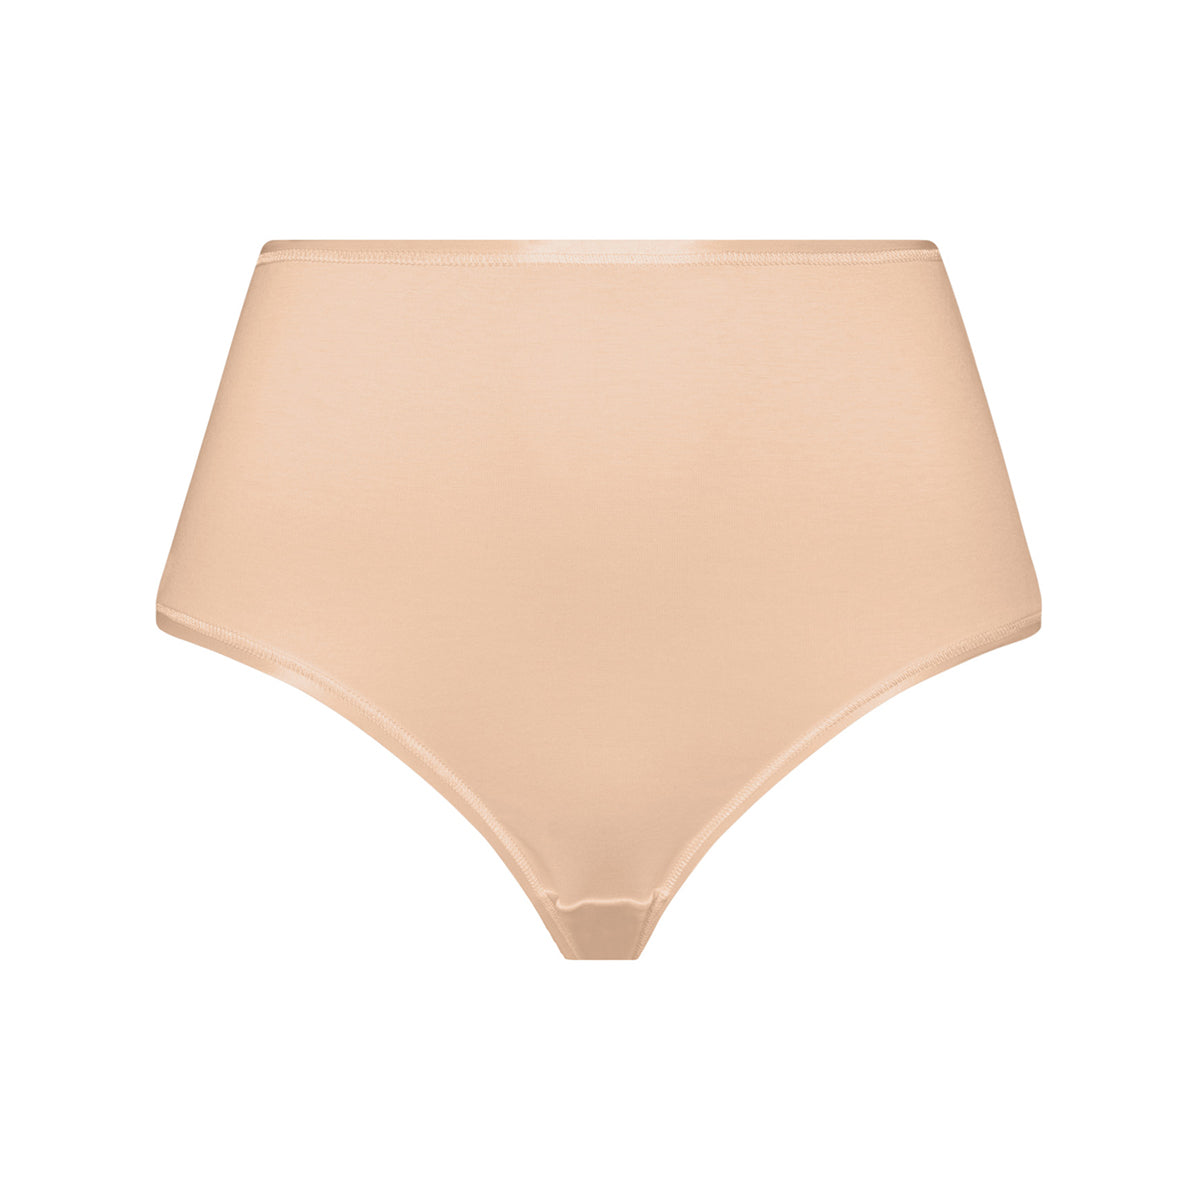 Cotton Seamless Shaping Brief